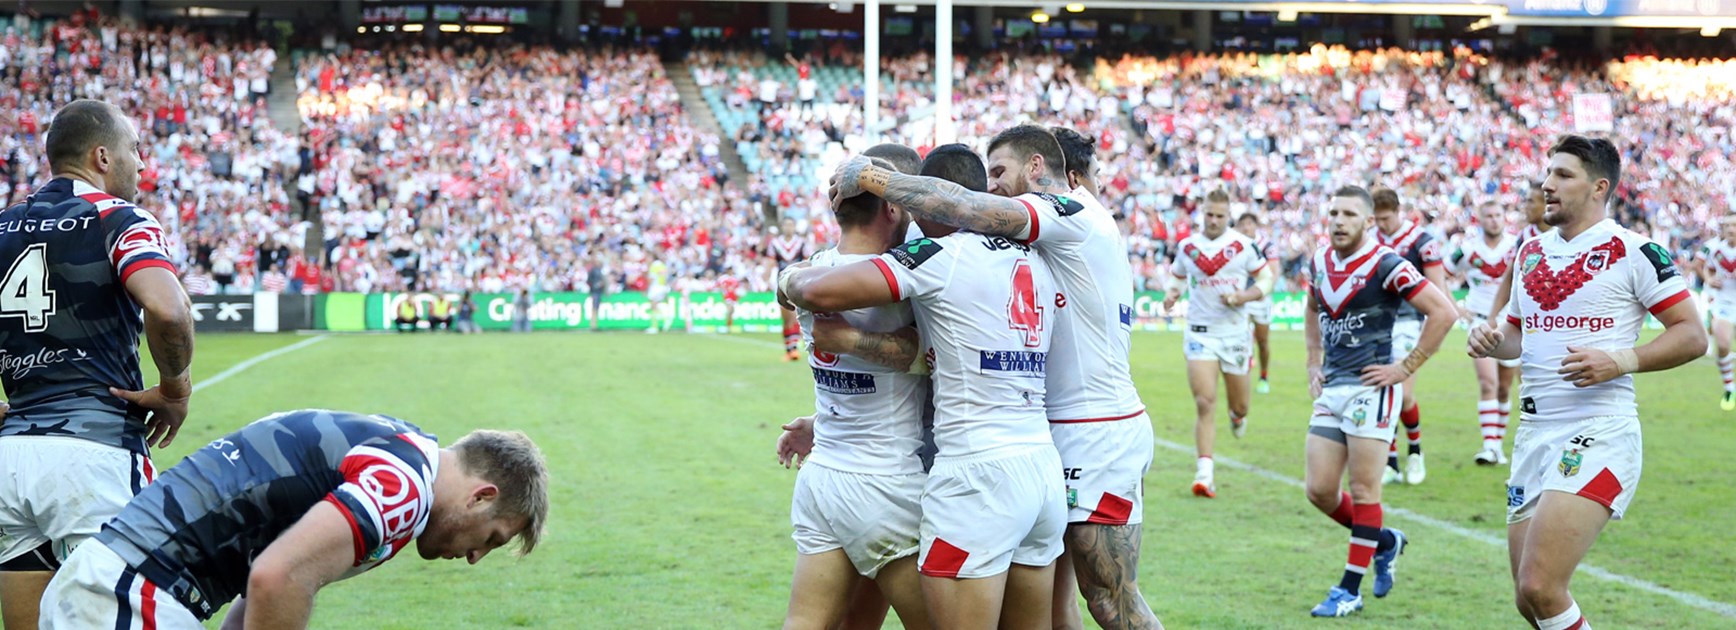 The Dragons celebrate a try against the Roosters on Anzac Day.